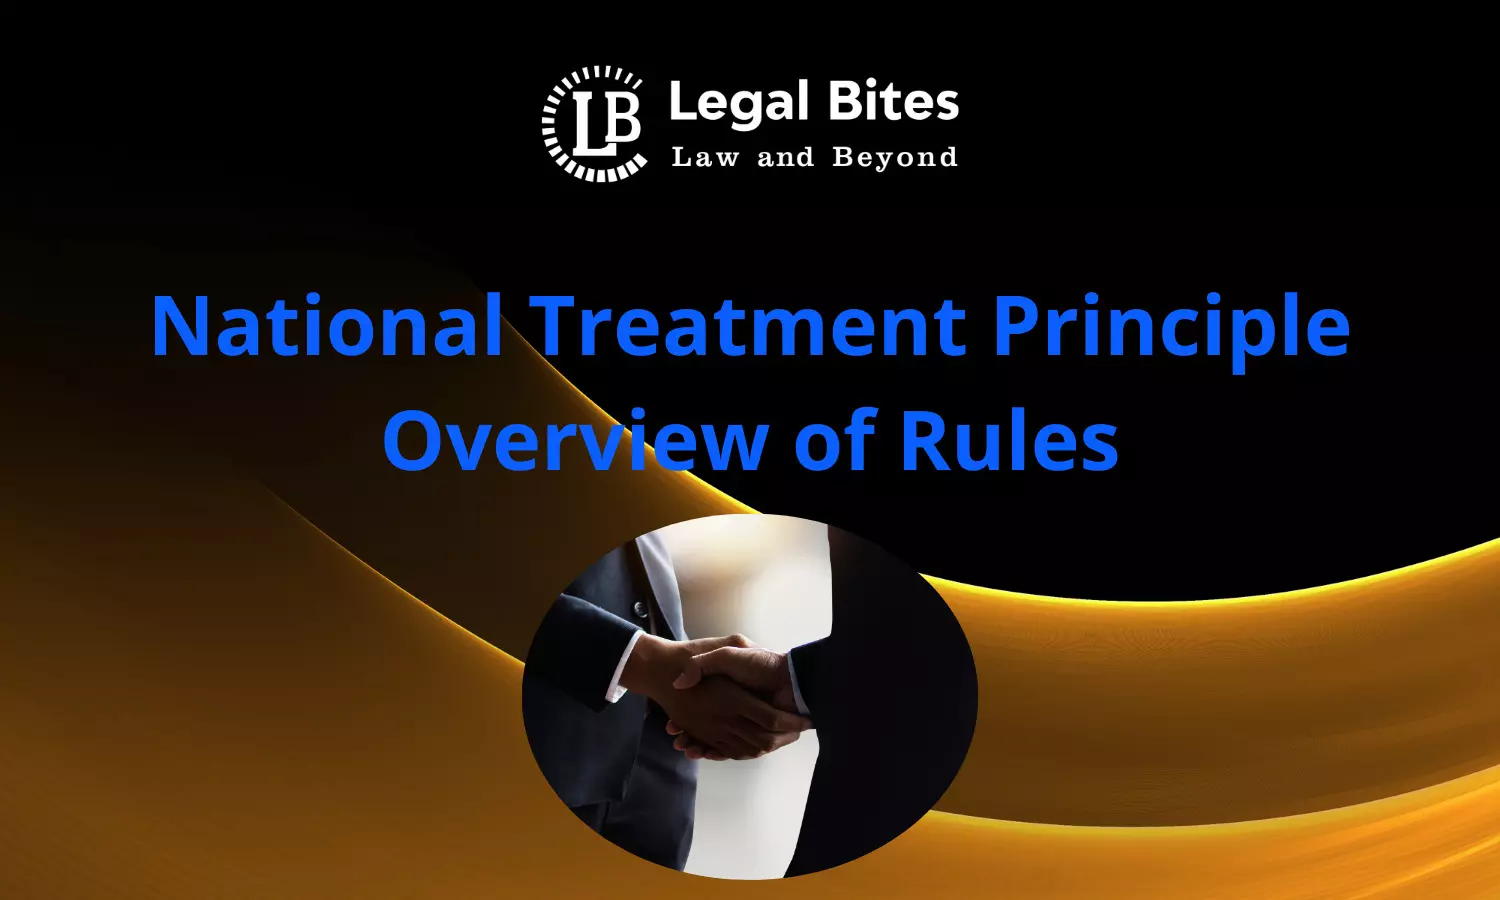 National Treatment Principle: Overview of Rules